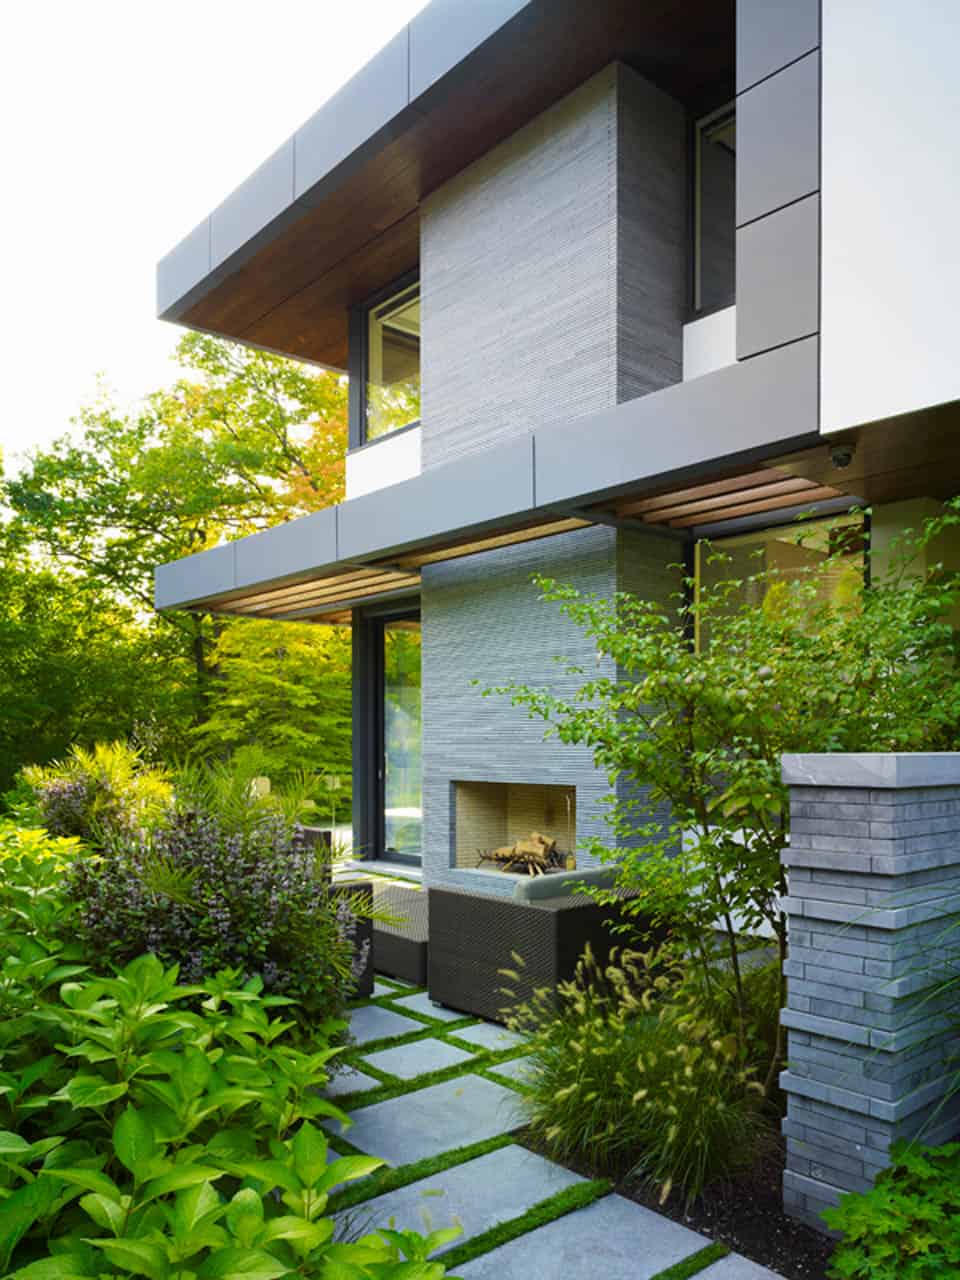 stunning-details-large-open-spaces-define-toronto-home-19-outdoors.jpg